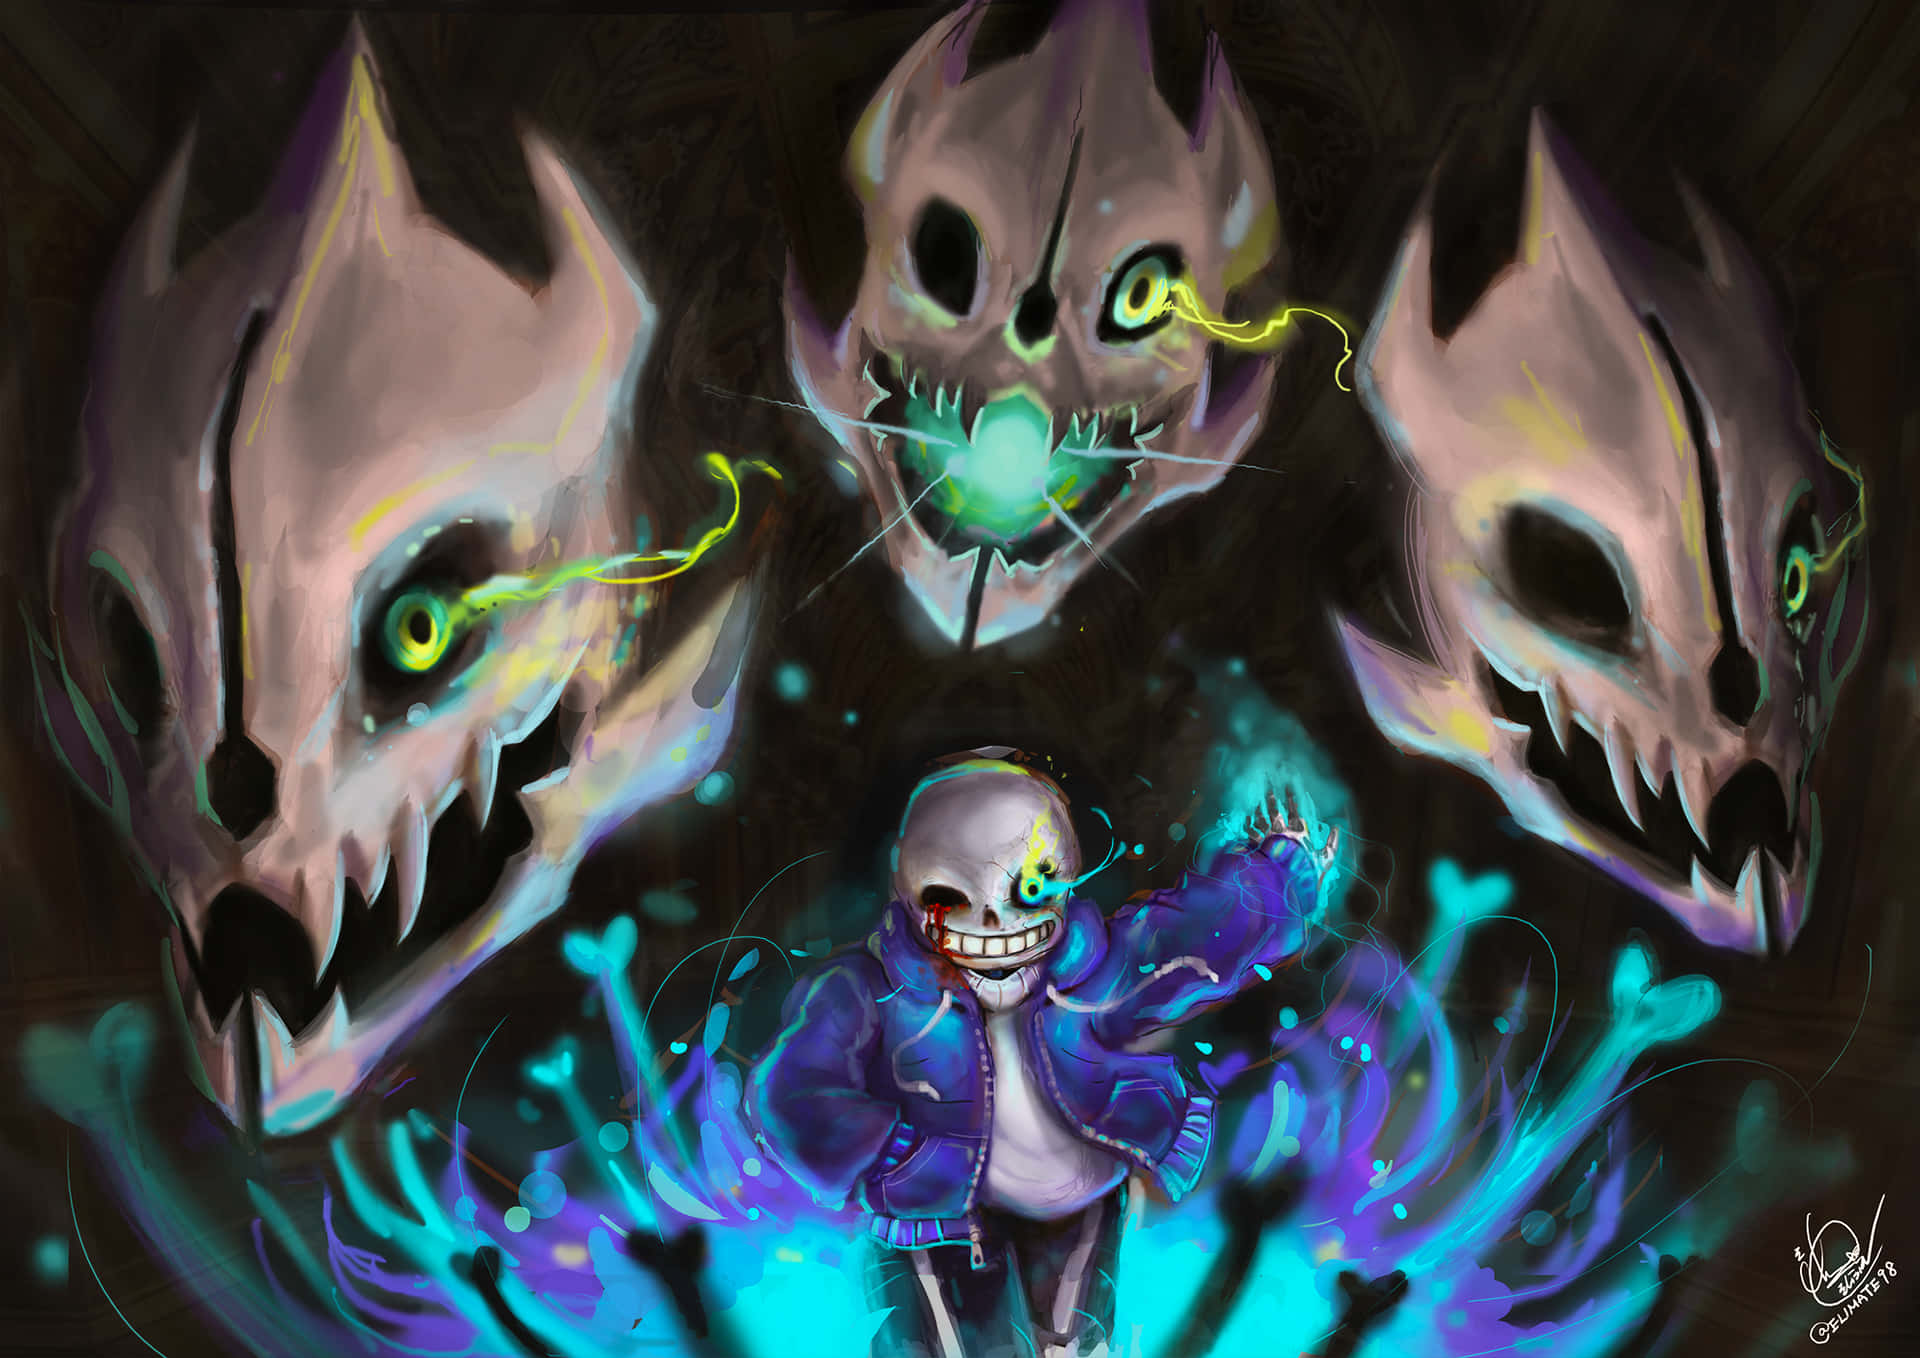 Sans from the indie RPG game Undertale grins mischievously. Wallpaper